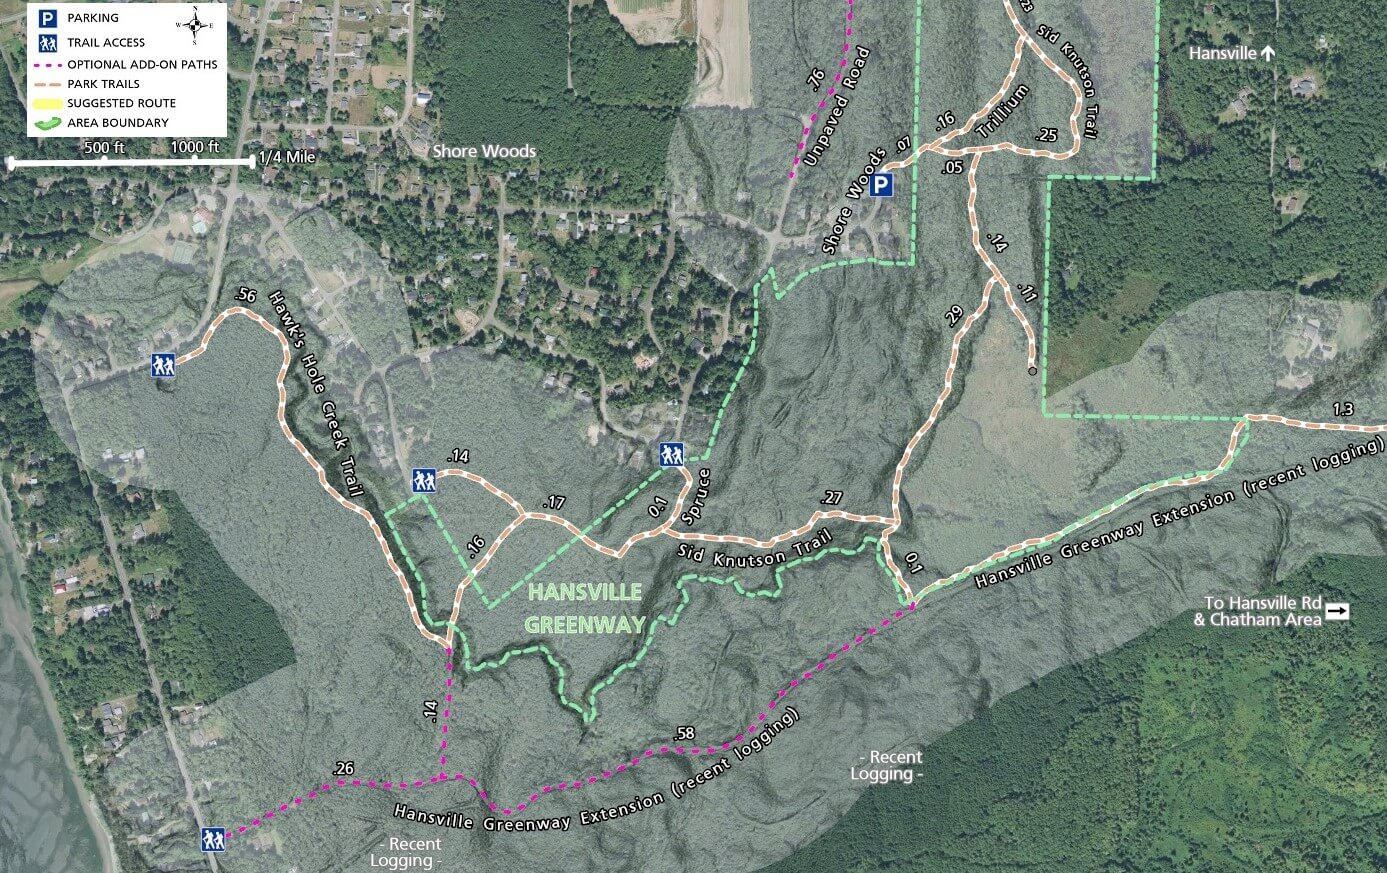 Hansville Greenway Trail Map - Imagery - SW and Shore Woods Area